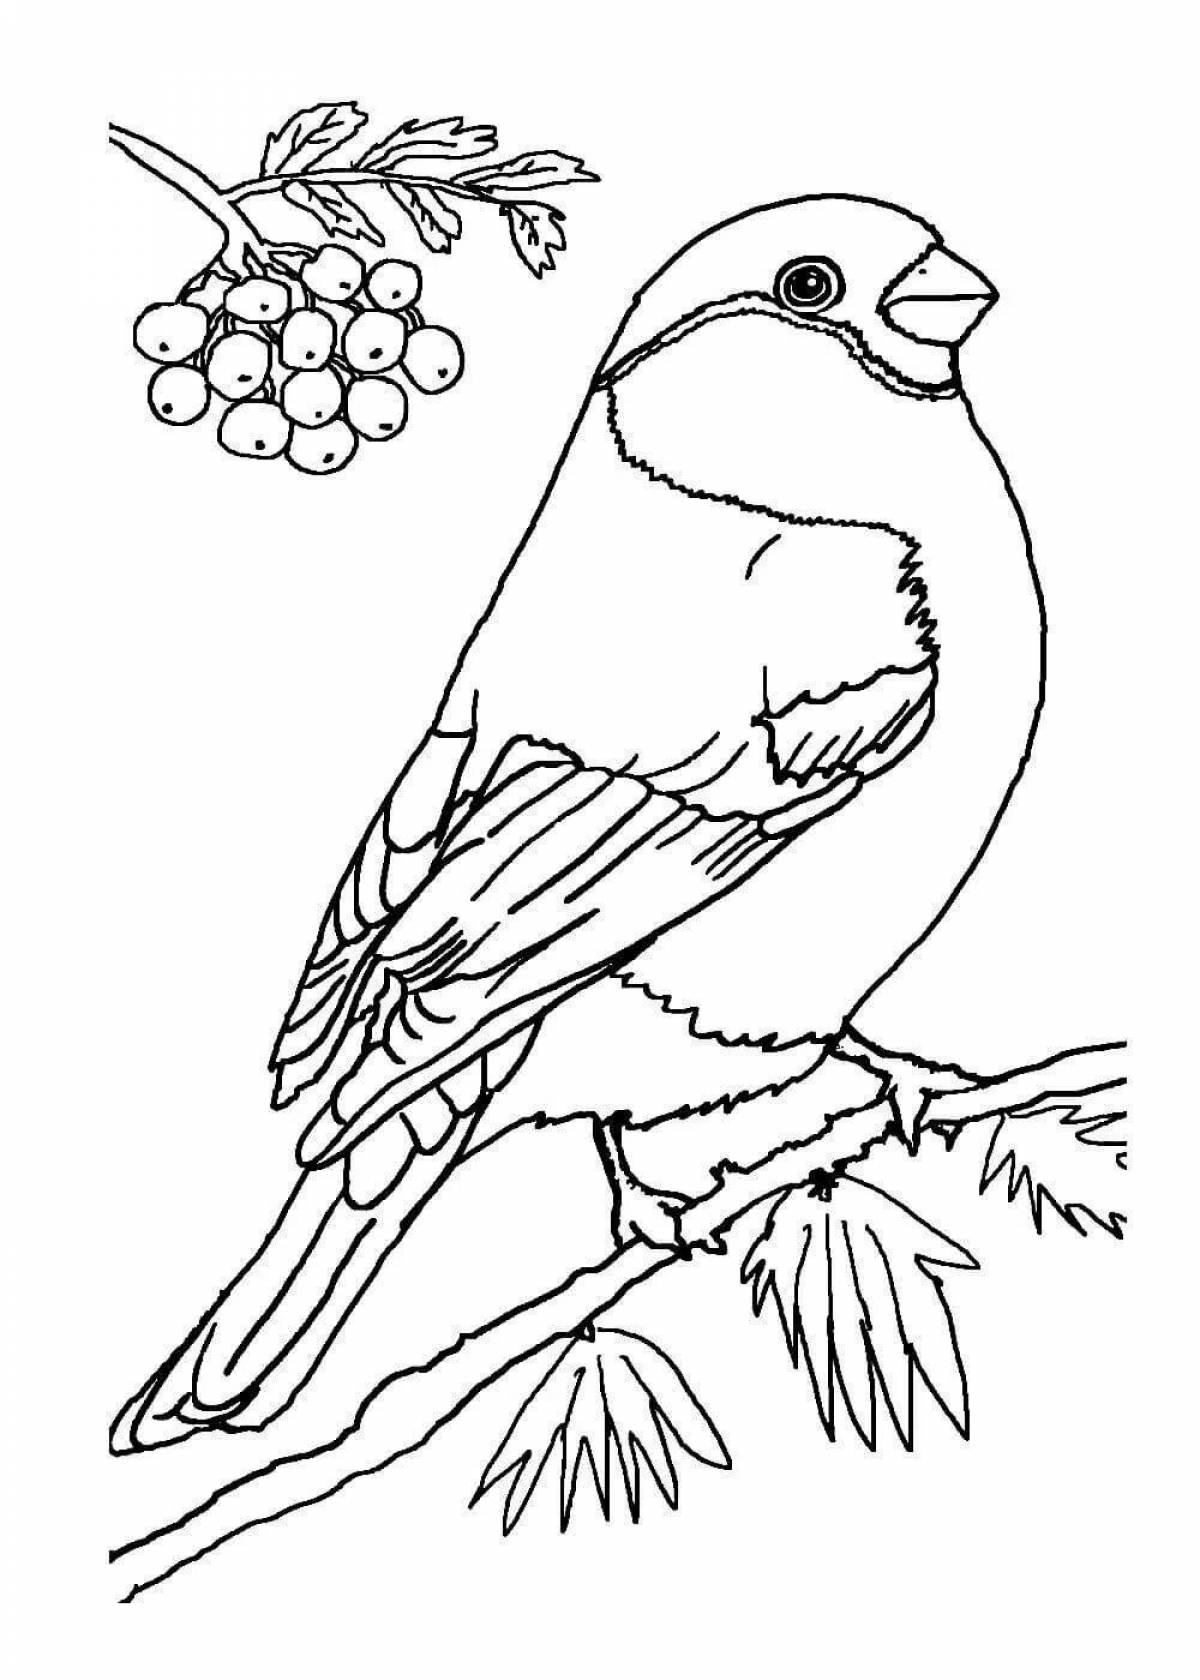 Shiny winter birds coloring book for 3-4 year olds